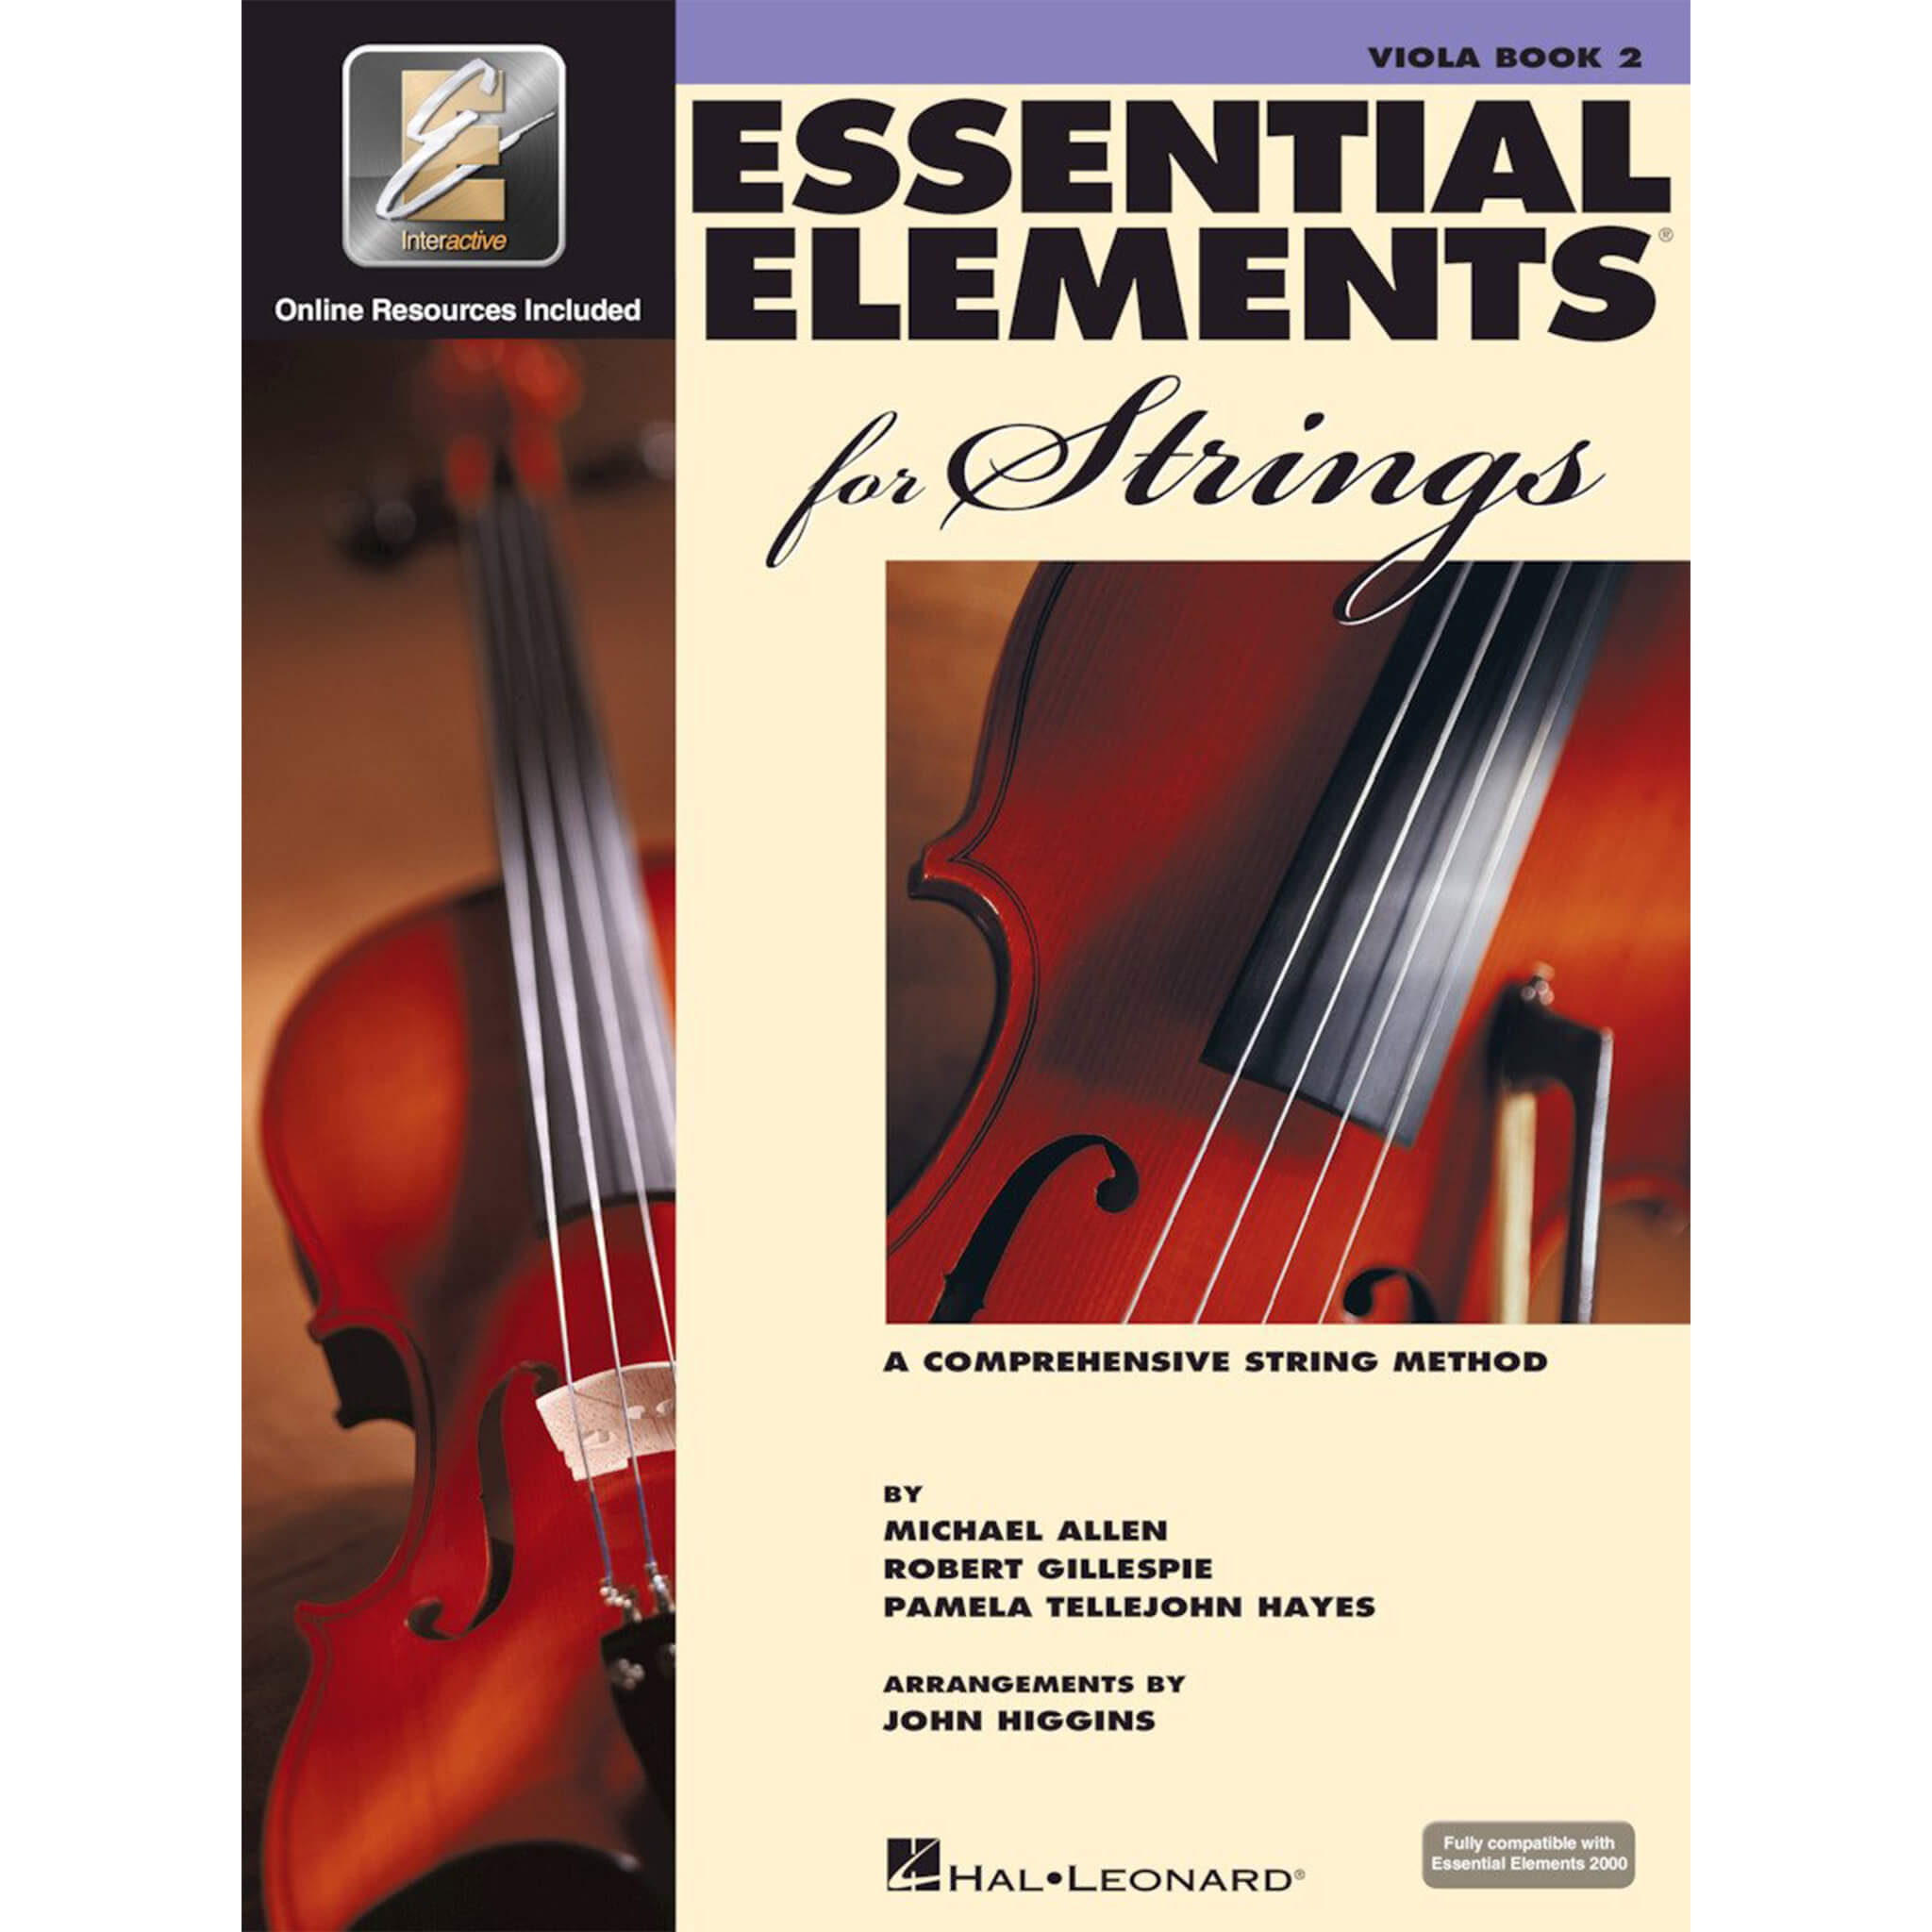 Essential Elements for Strings, Viola Book 2